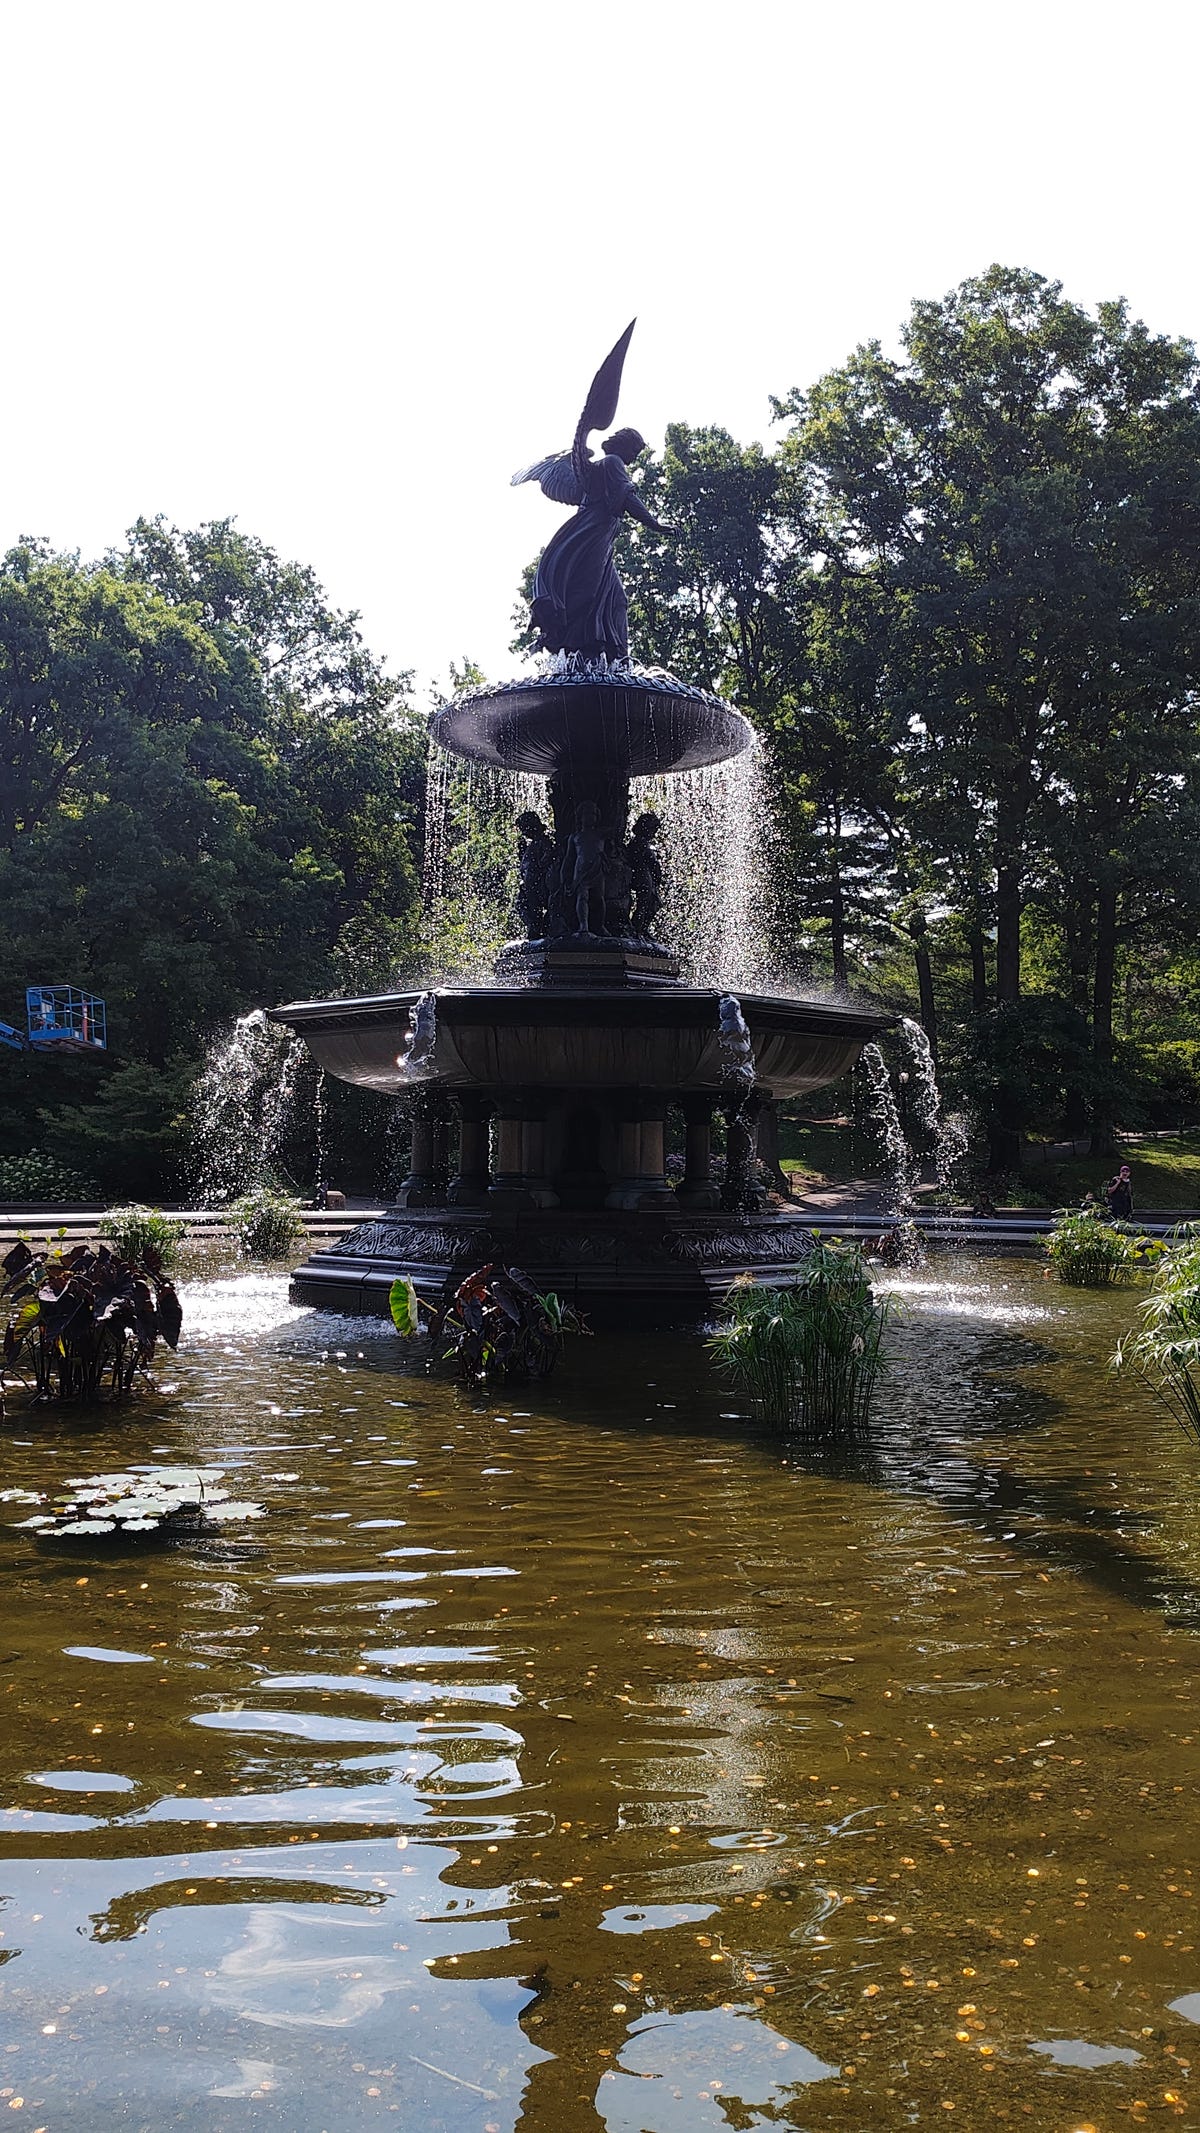 A photo of the fountain at Central Park taken on the Razr Plus.